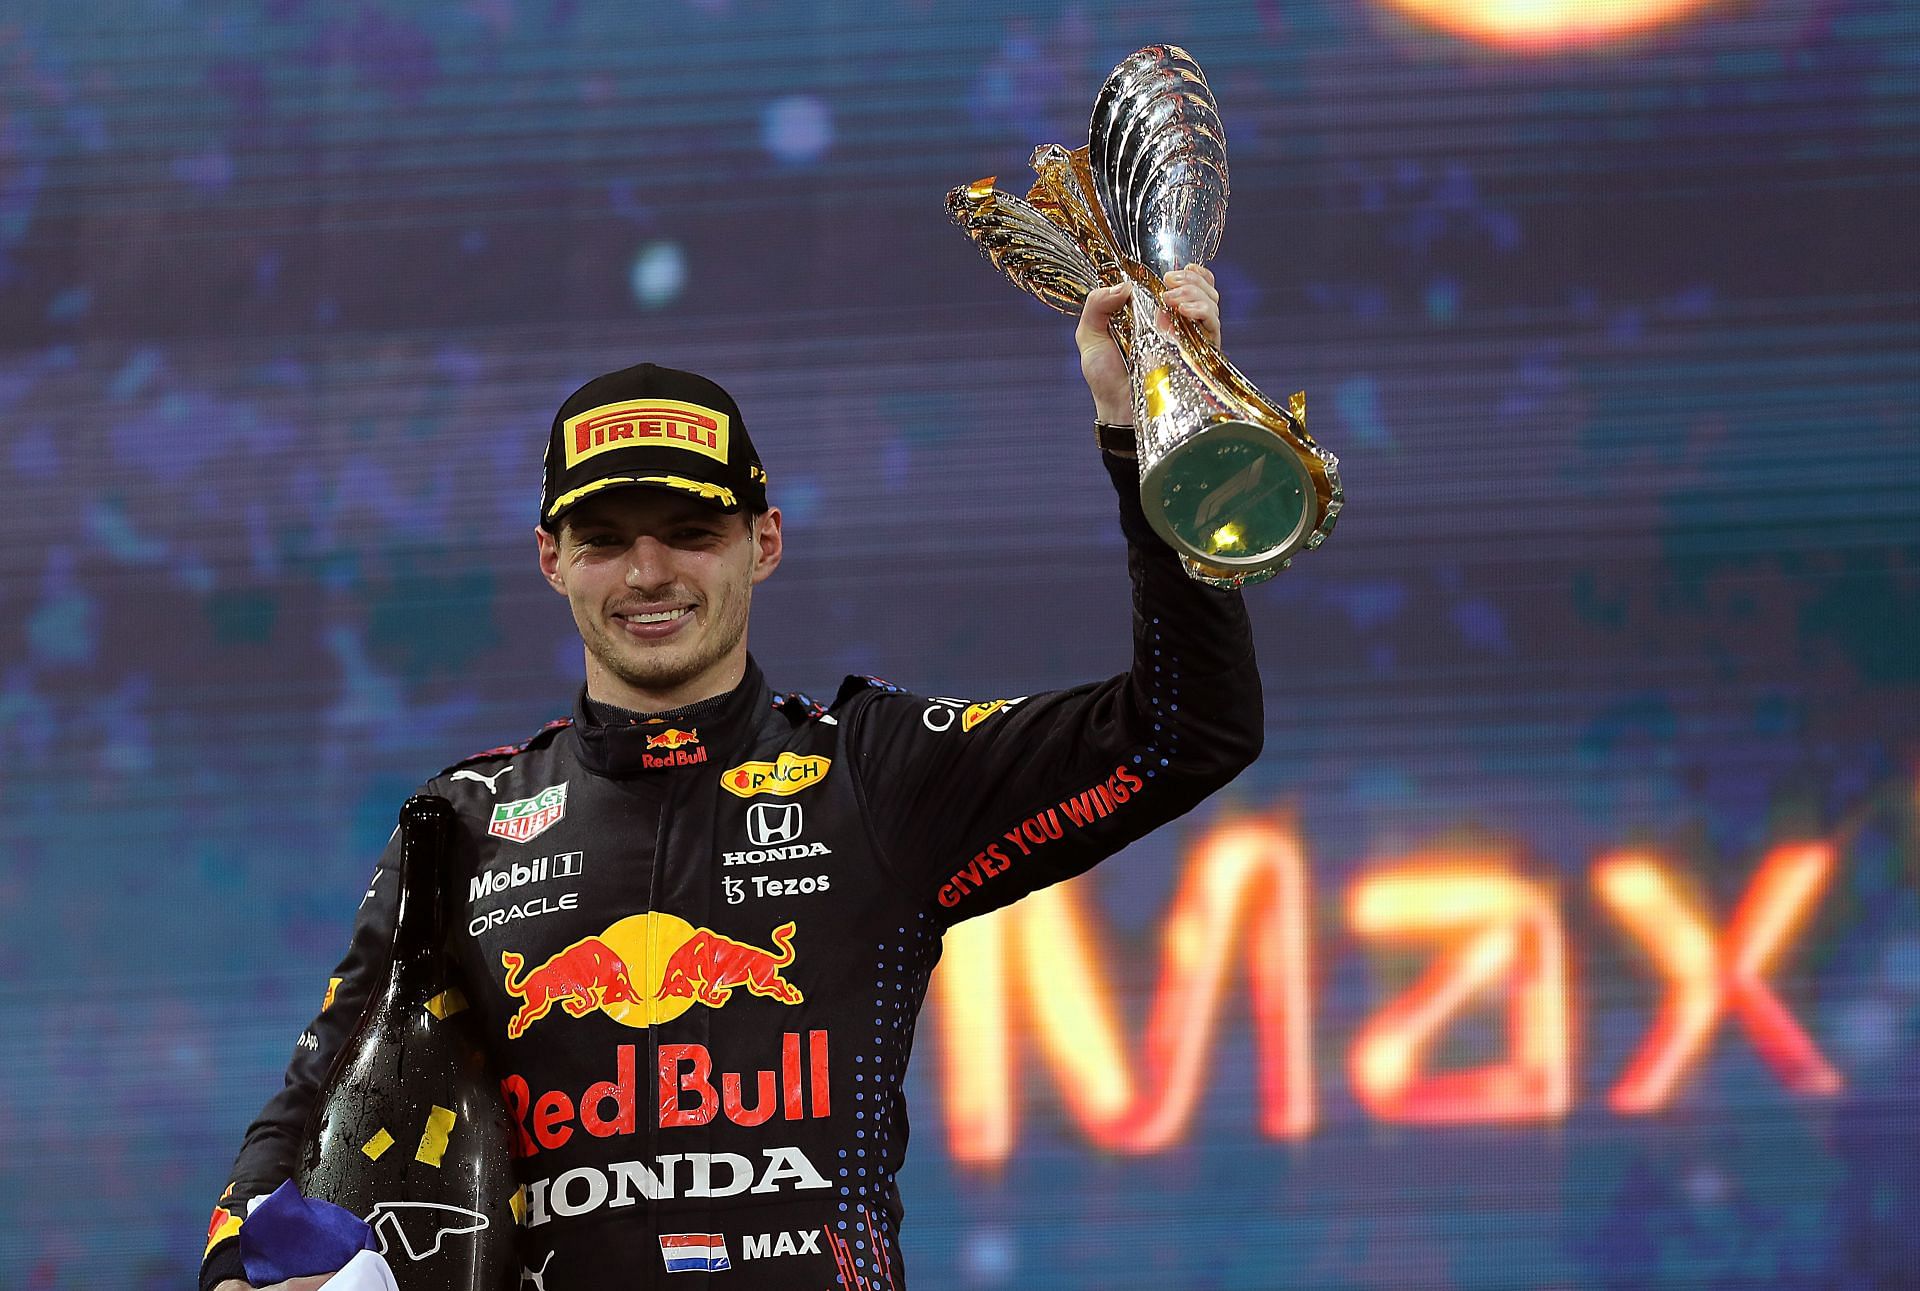 F1 Grand Prix of Abu Dhabi - Max Verstappen won his maiden title in 2021